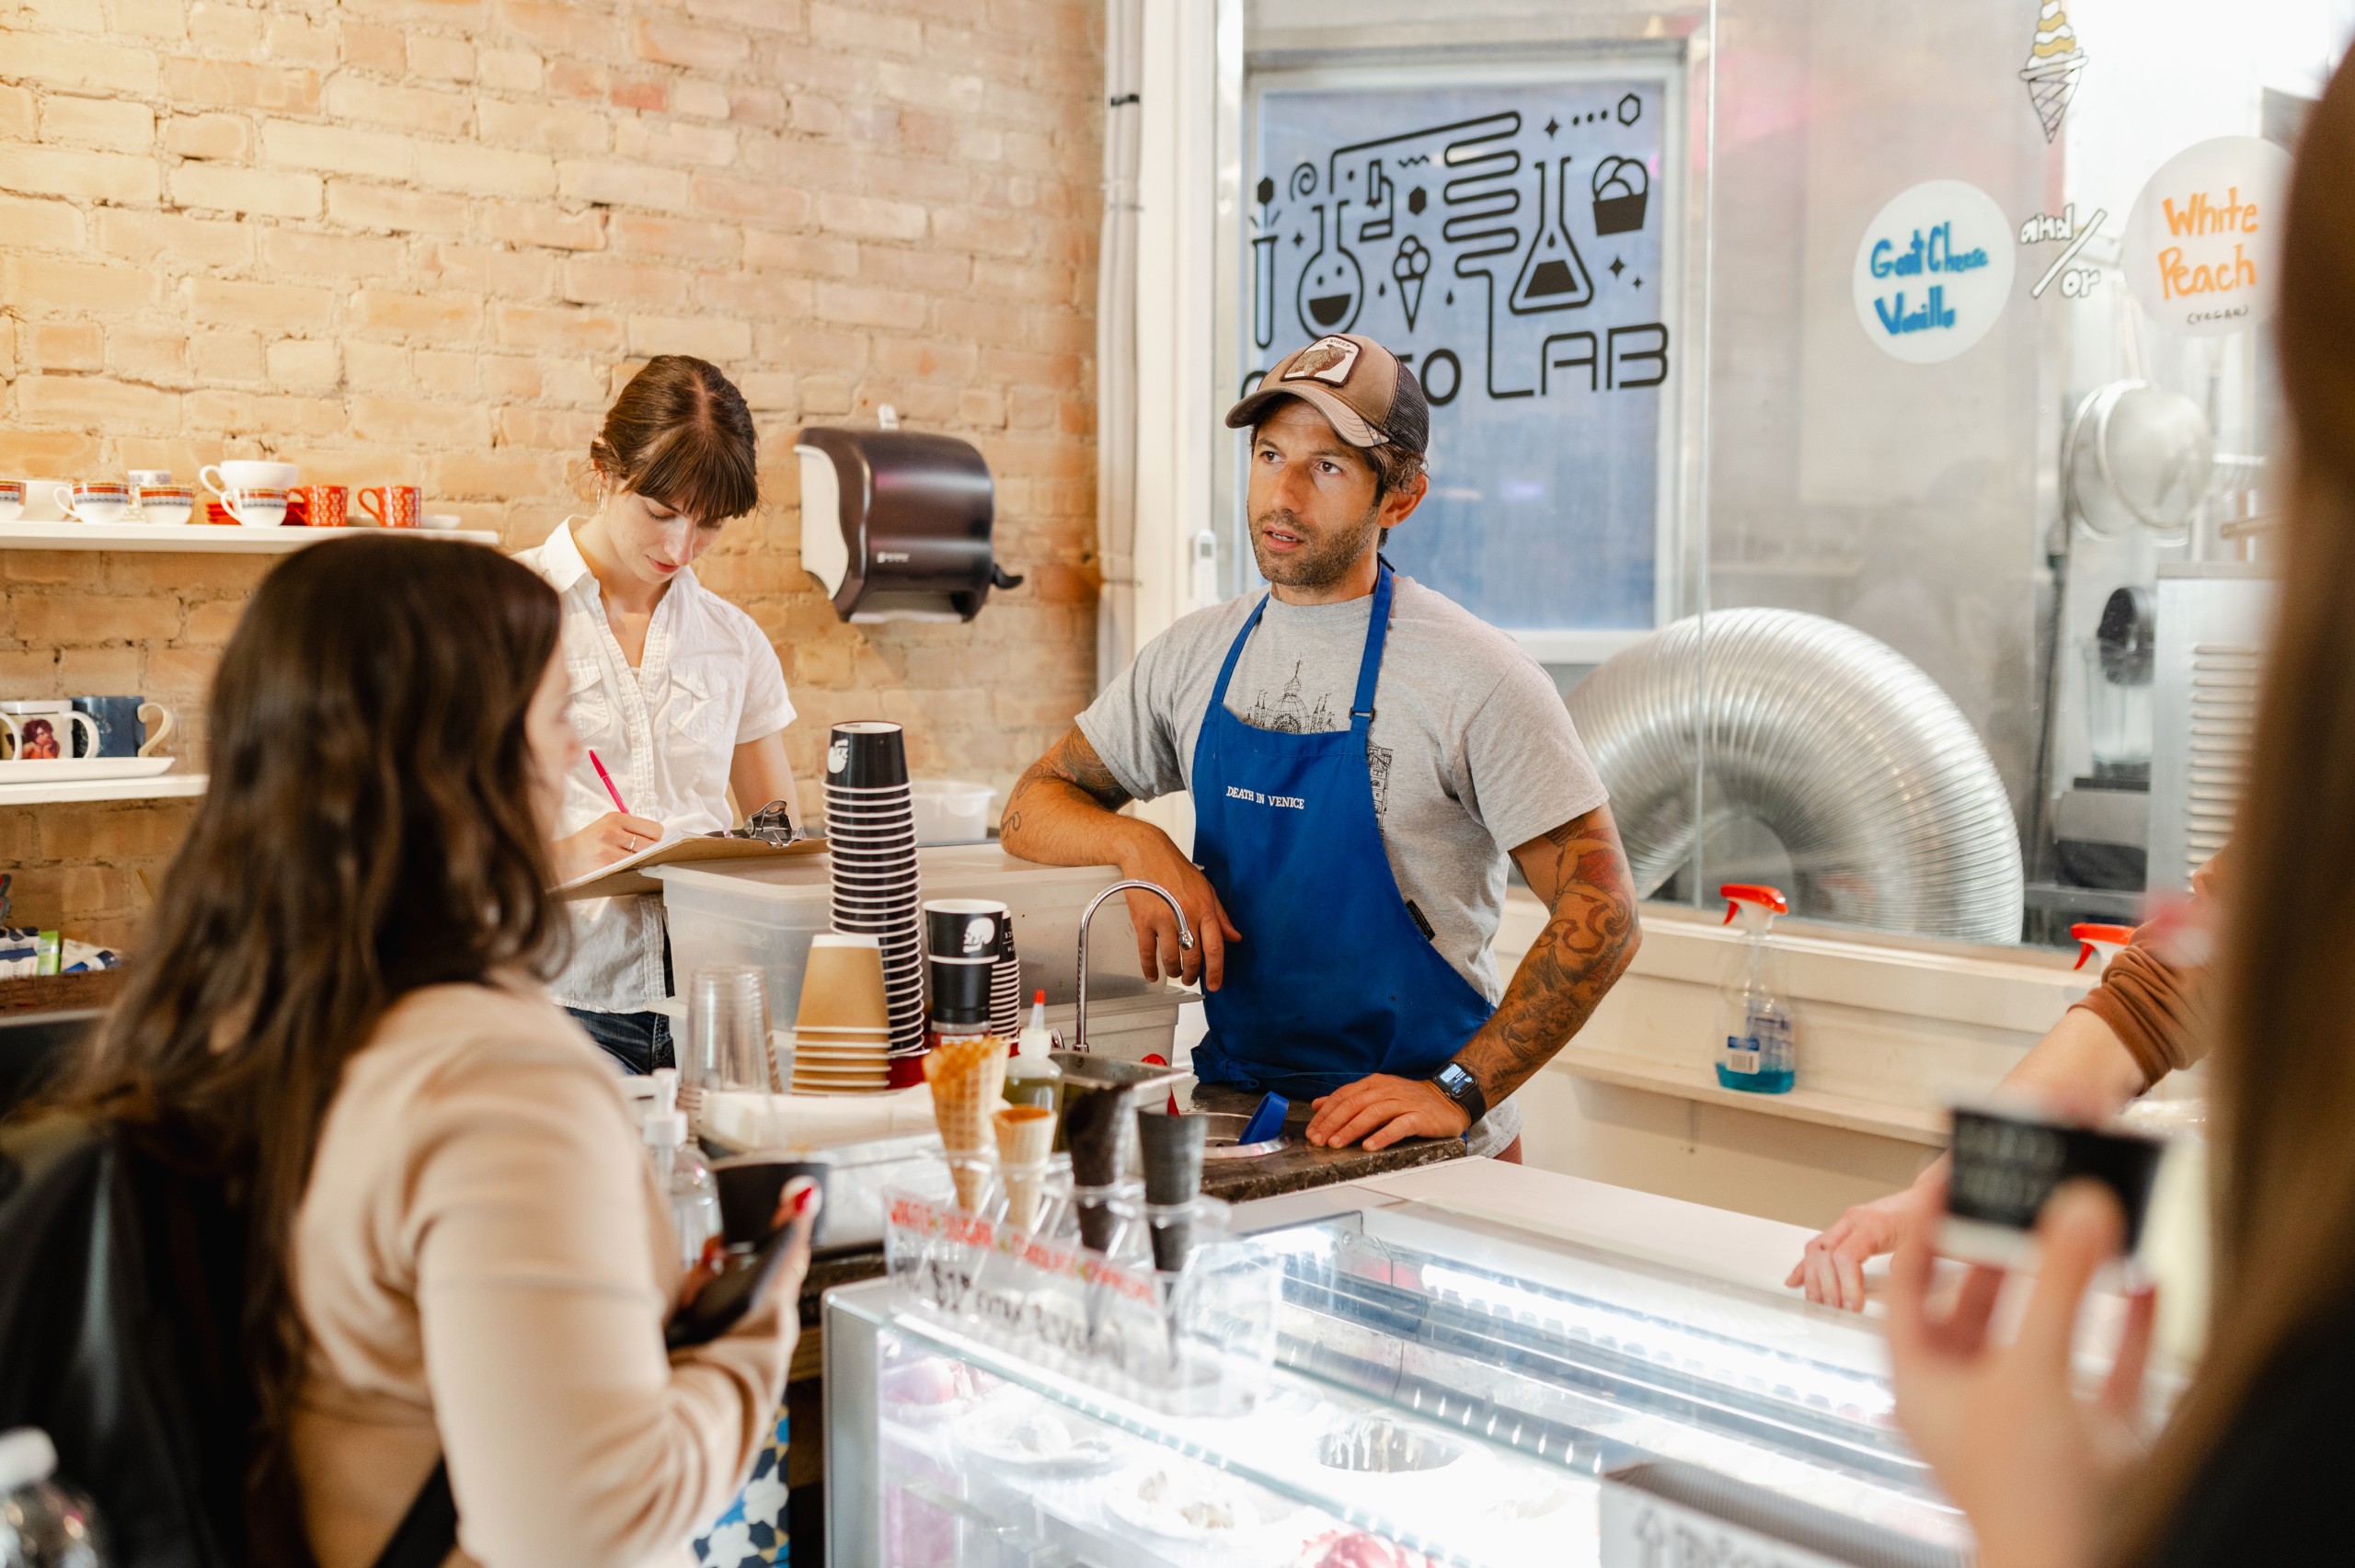 A group of people standing at a counter at an ice cream shop captured through event photography.